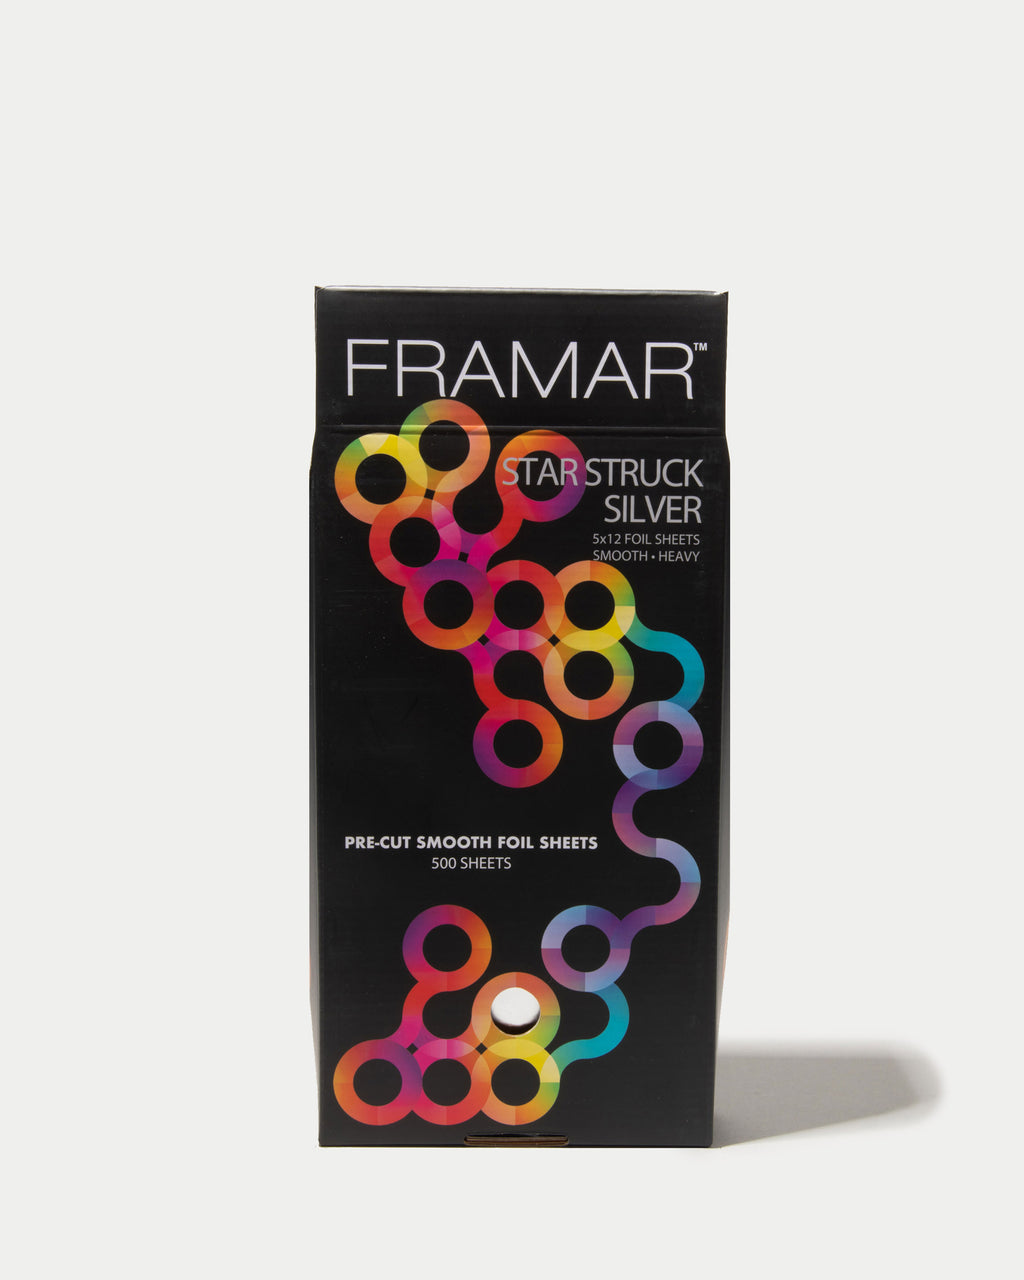 Framar - If you could grab 3 things from the Framar